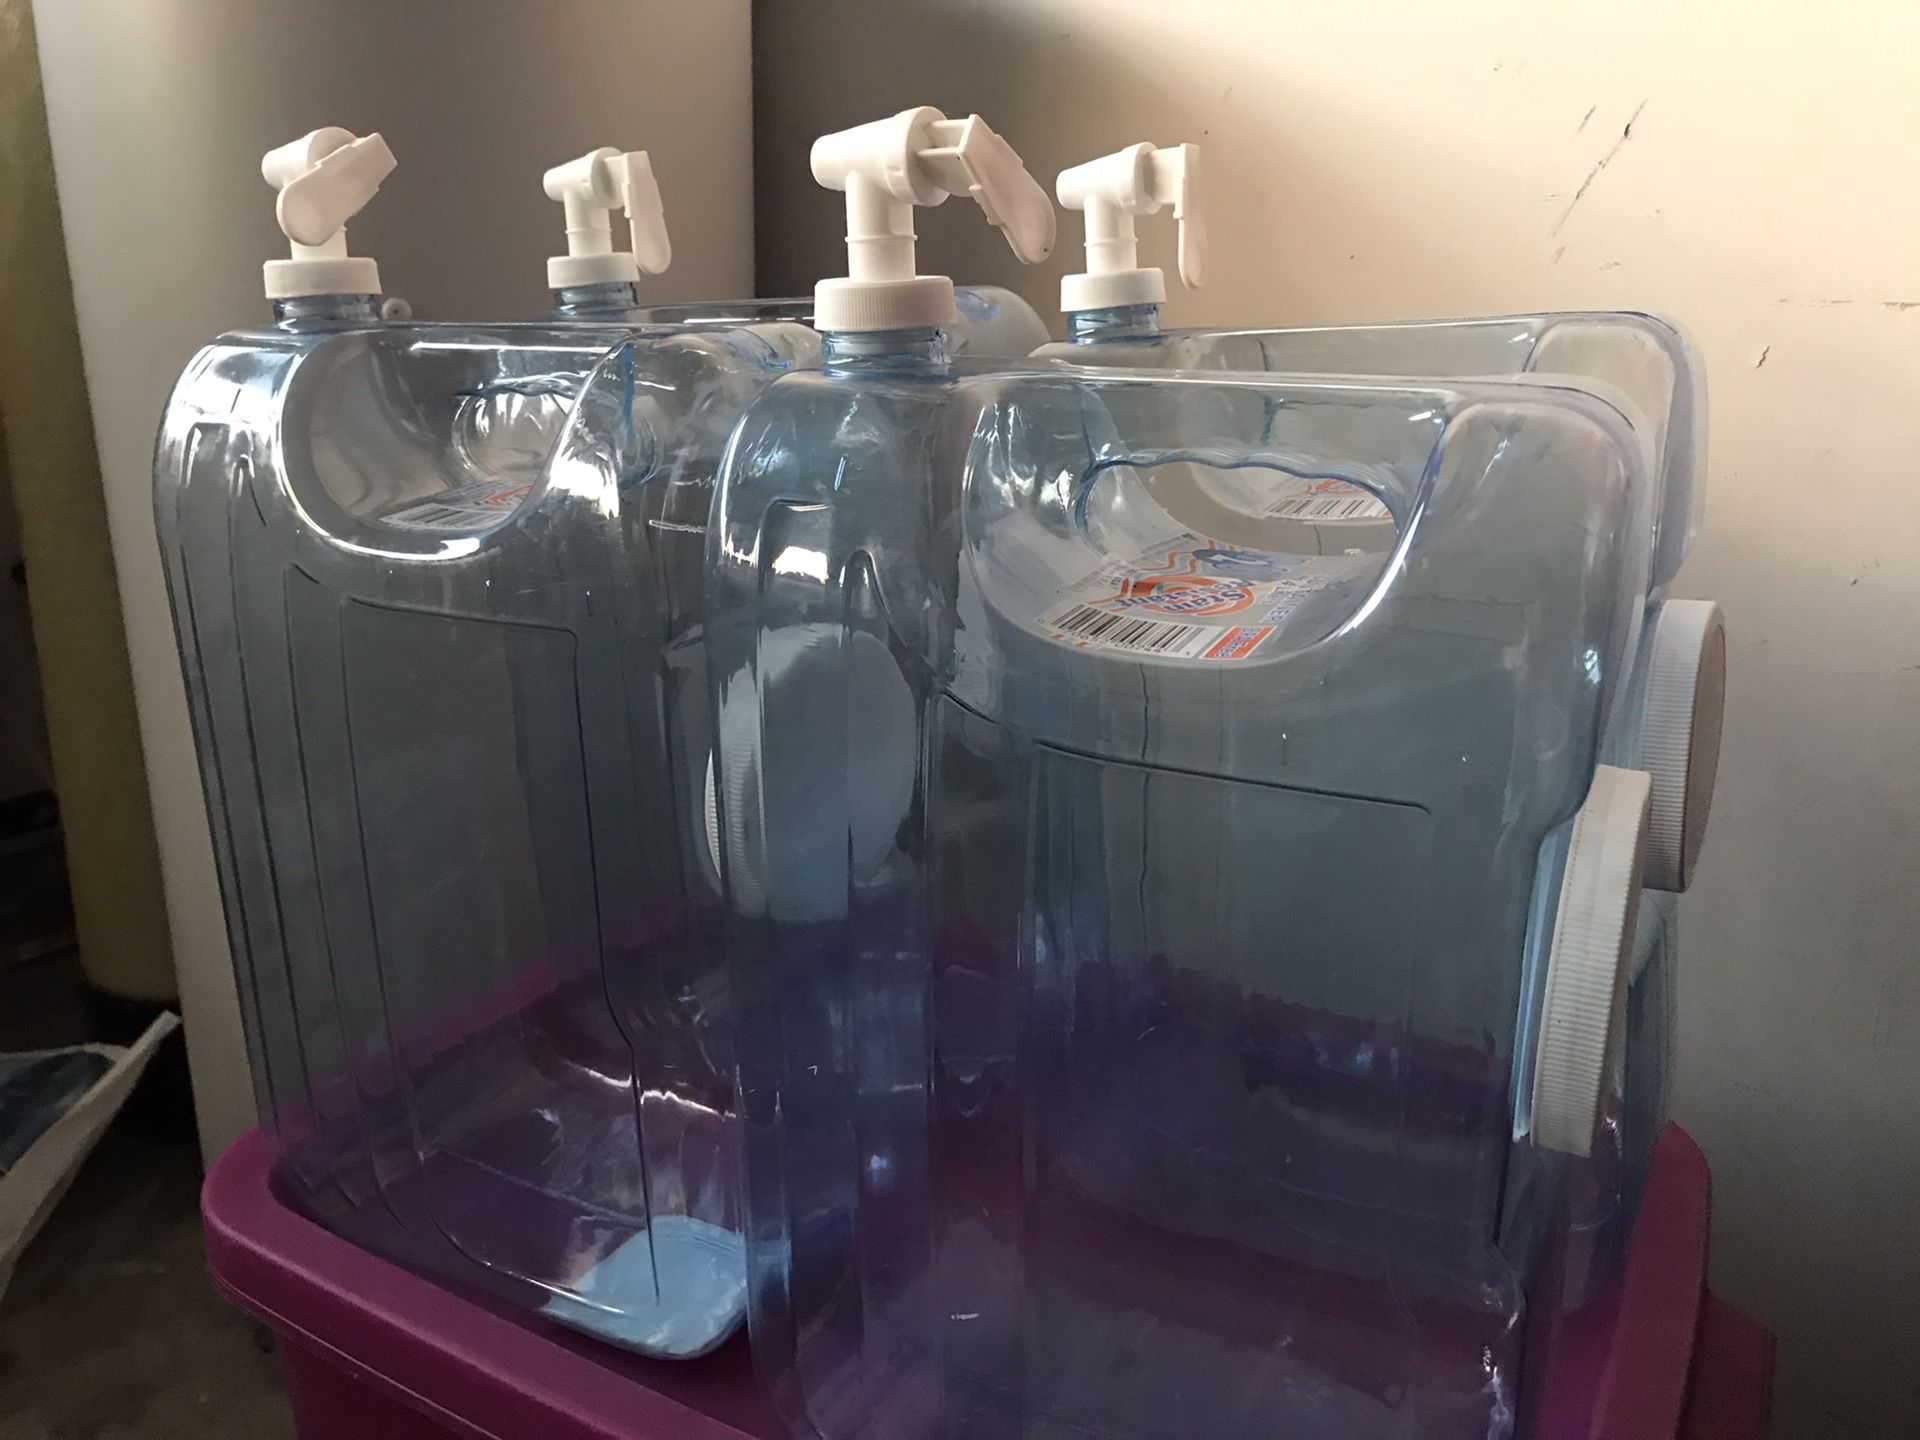 4 x 2.5 gallon each water slimline container